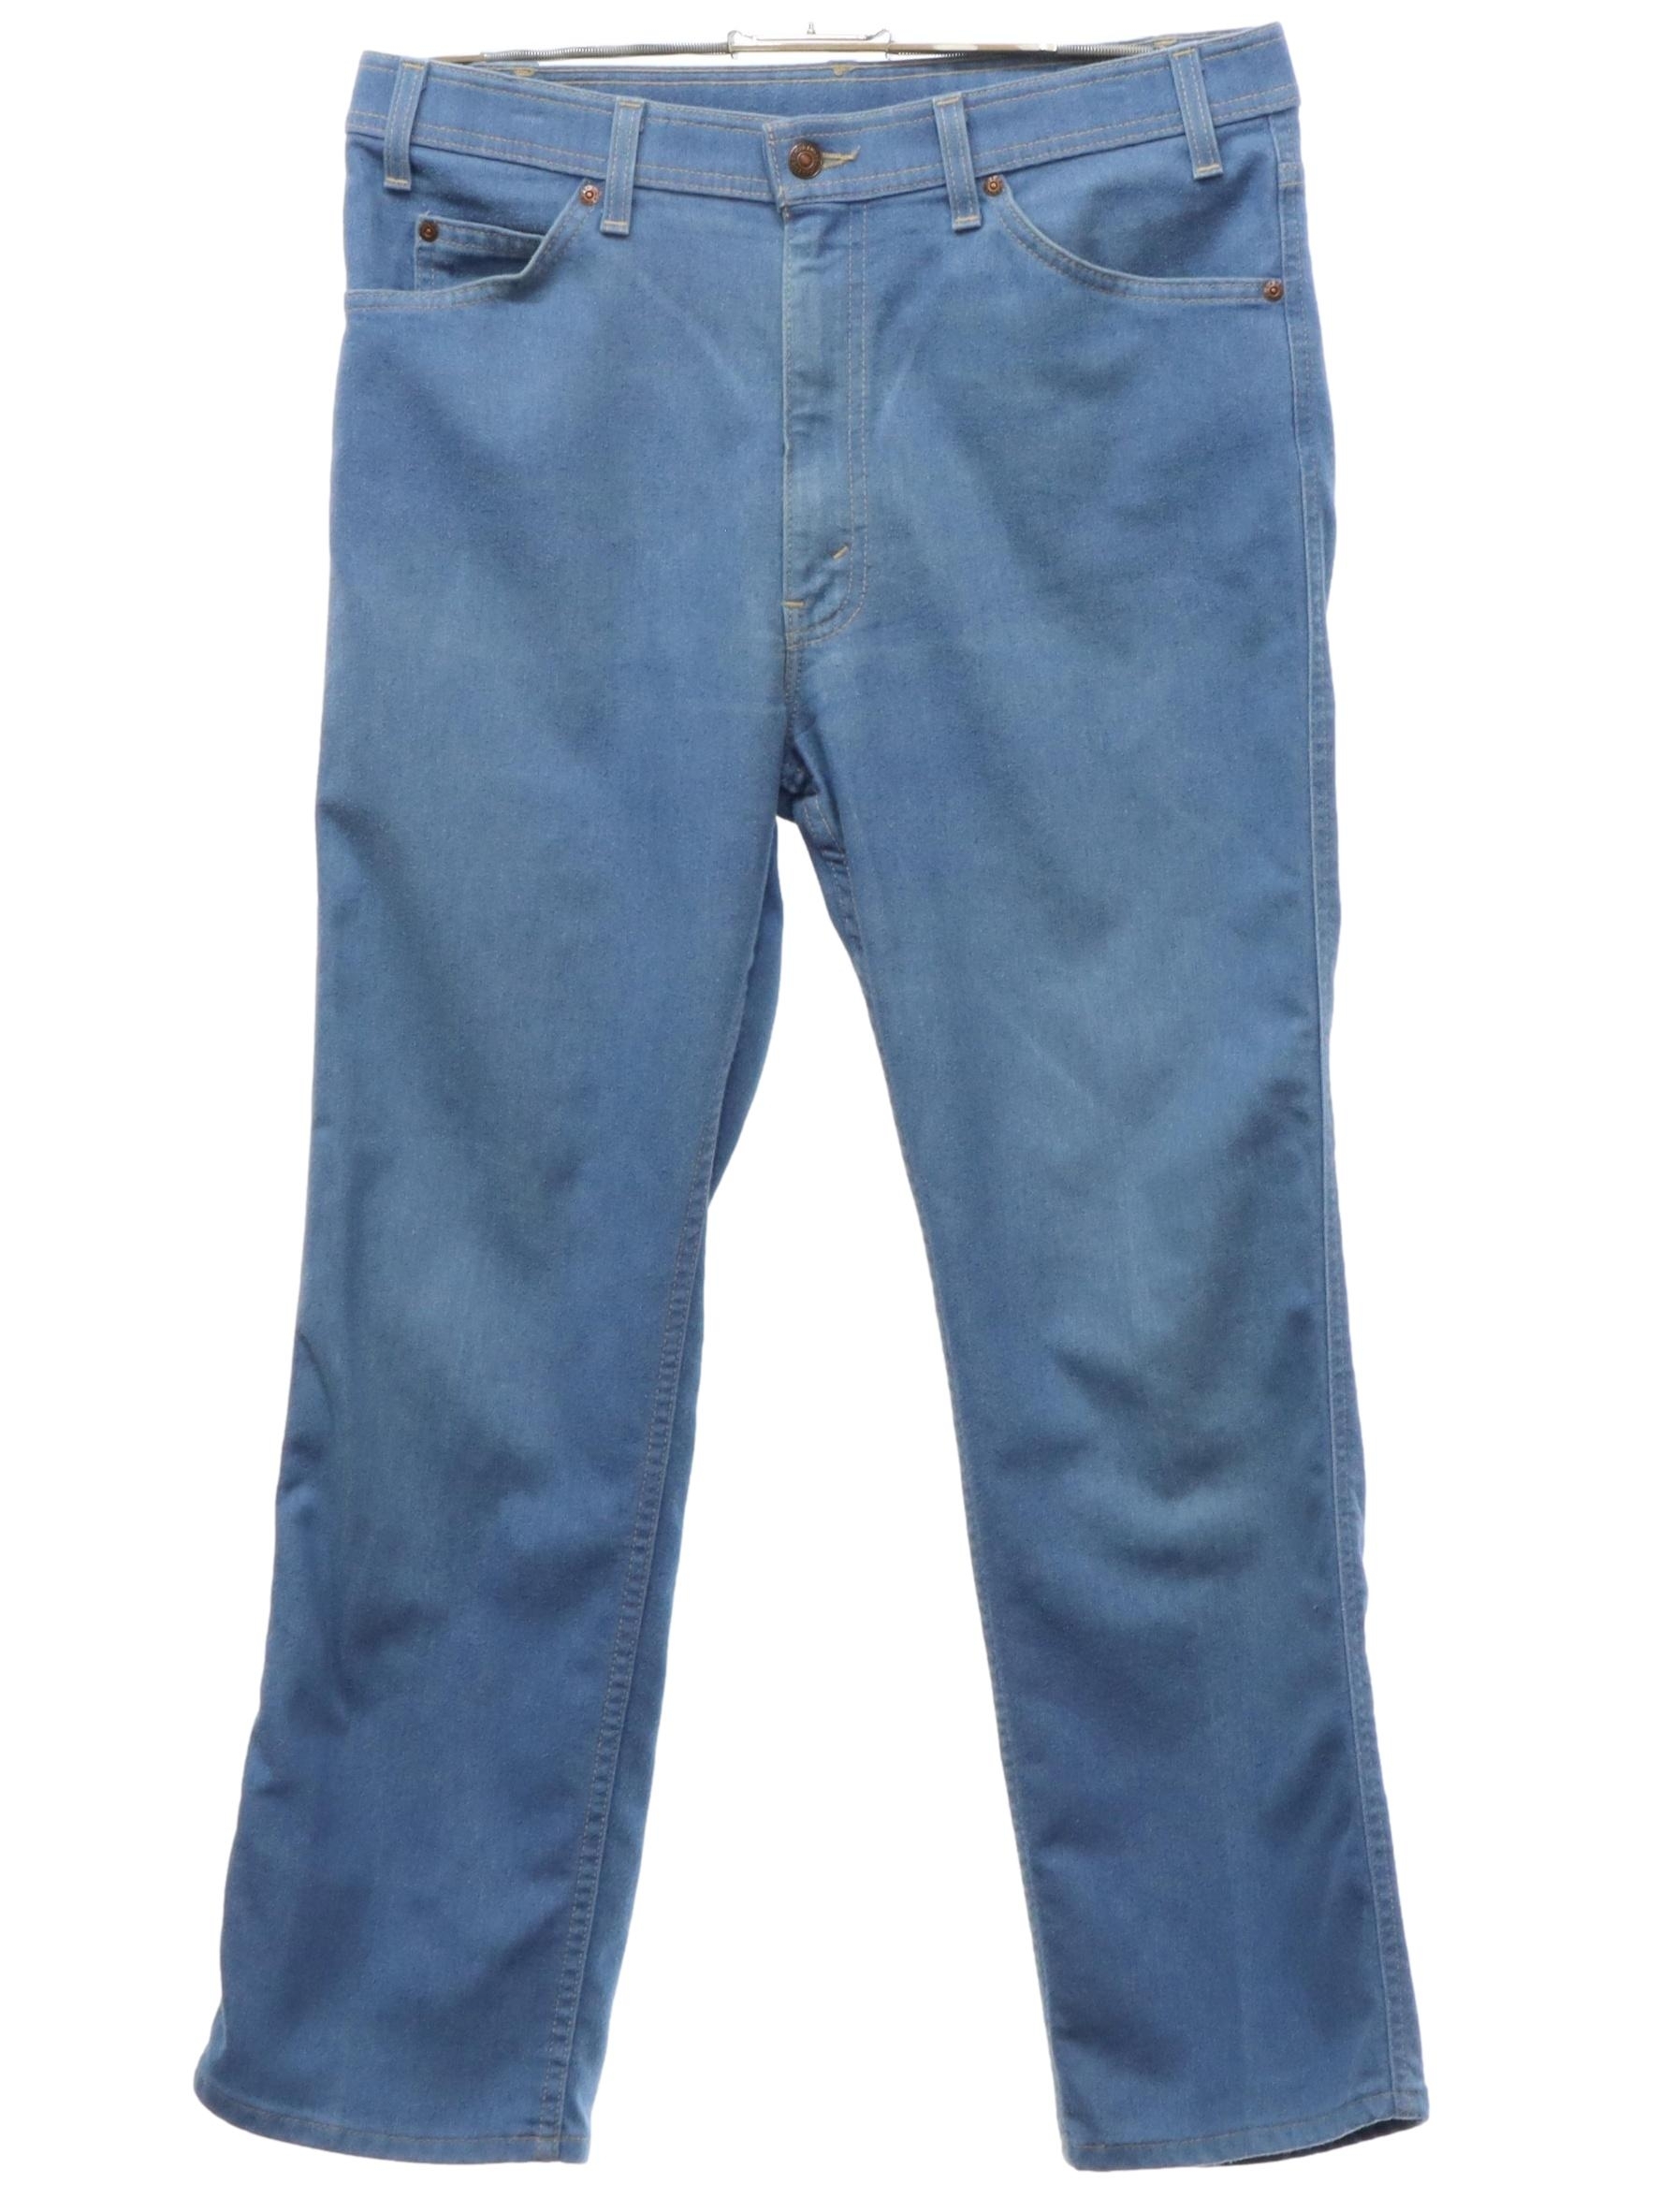 1970's Pants (Levis Action Jeans): 70s -Levis Action Jeans- Mens slightly  faded and worn blue brushed cotton denim jeans pants with zipper fly  closure with button. Five pocket style - front scoop